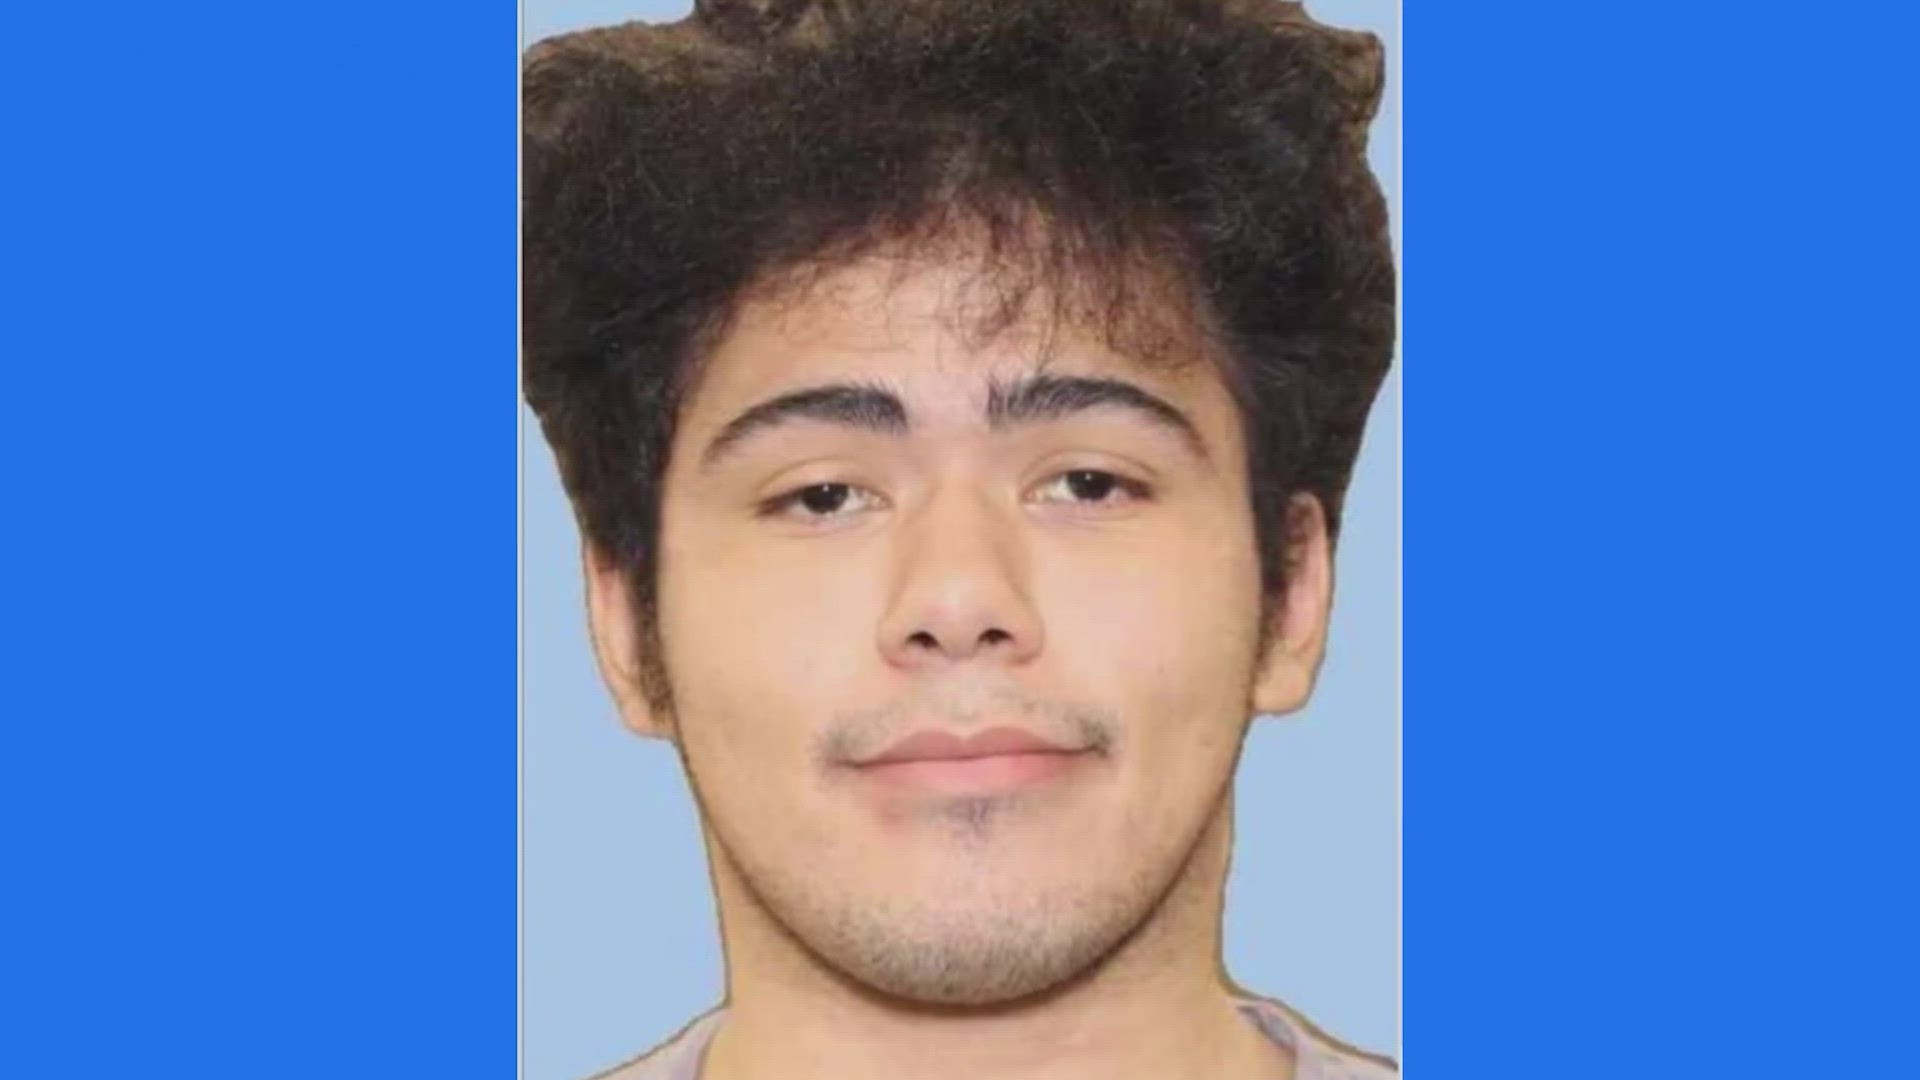 League City police are searching for 20-year-old Victor Fermin who's accused of stalking and threatening a teen girl he met on social media in 2022.